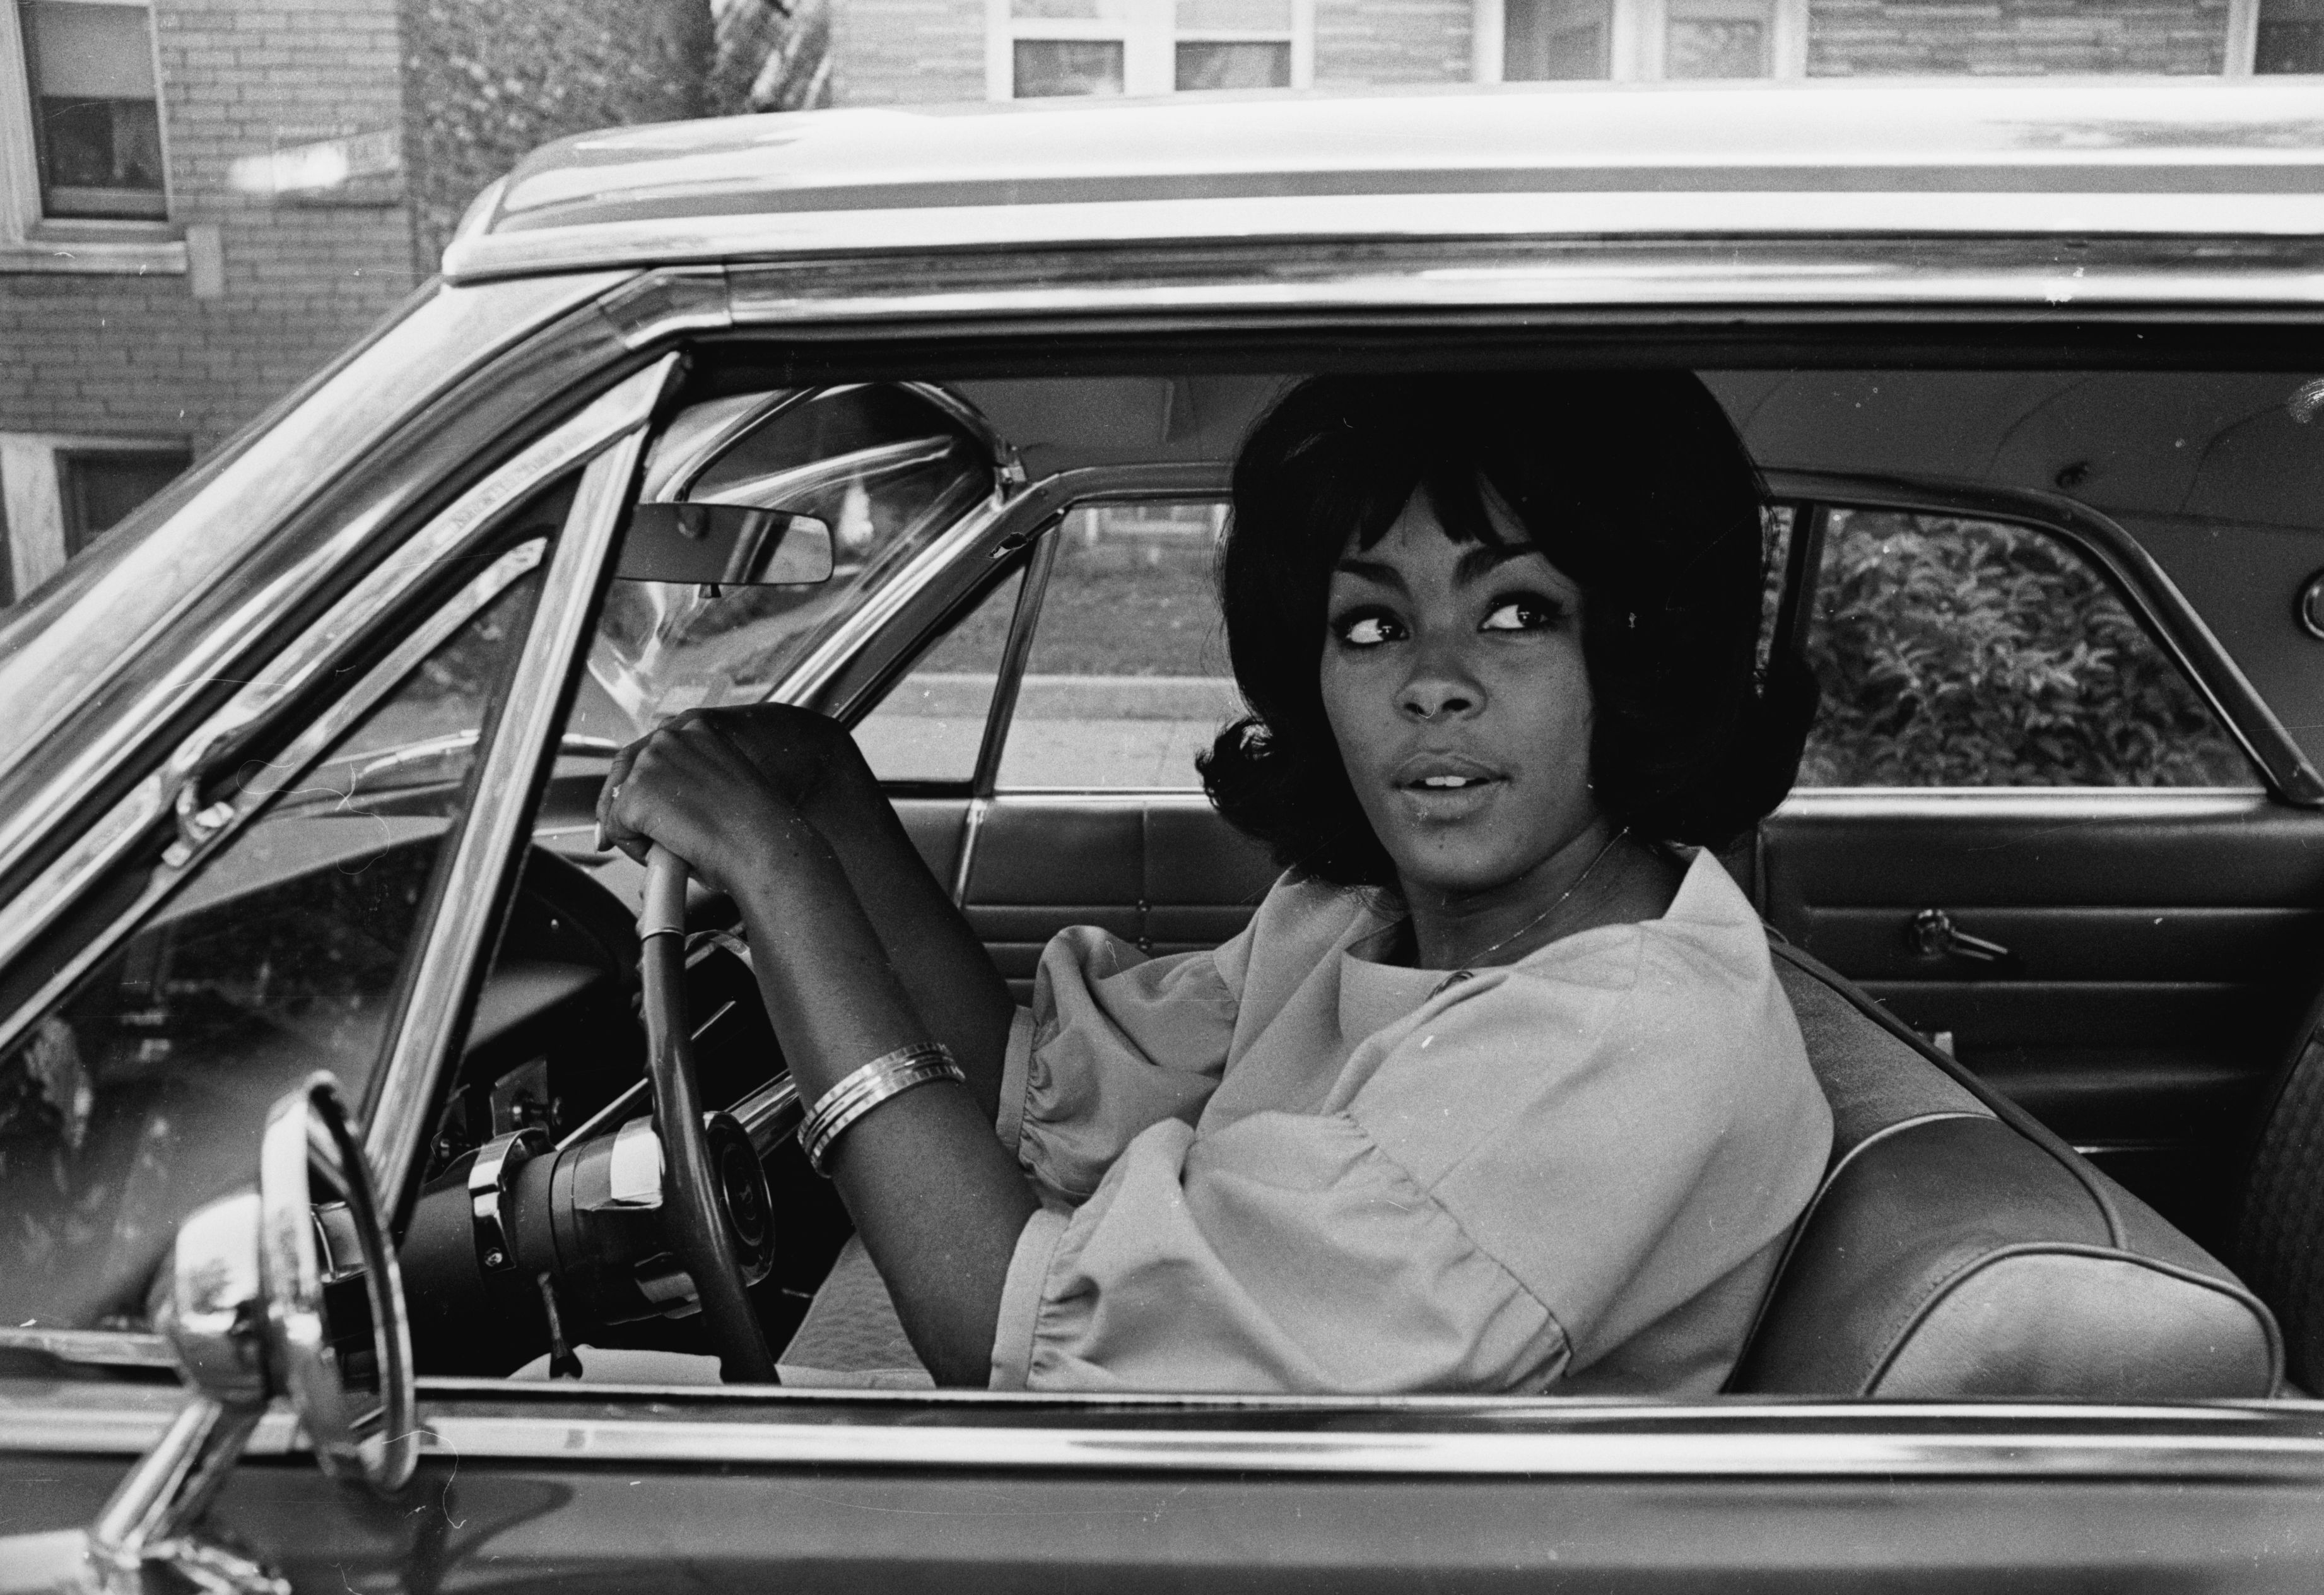 Sonji Roi, Muhammad Ali's wife pictured in her car on June 26, 1965. | Source: Getty Images